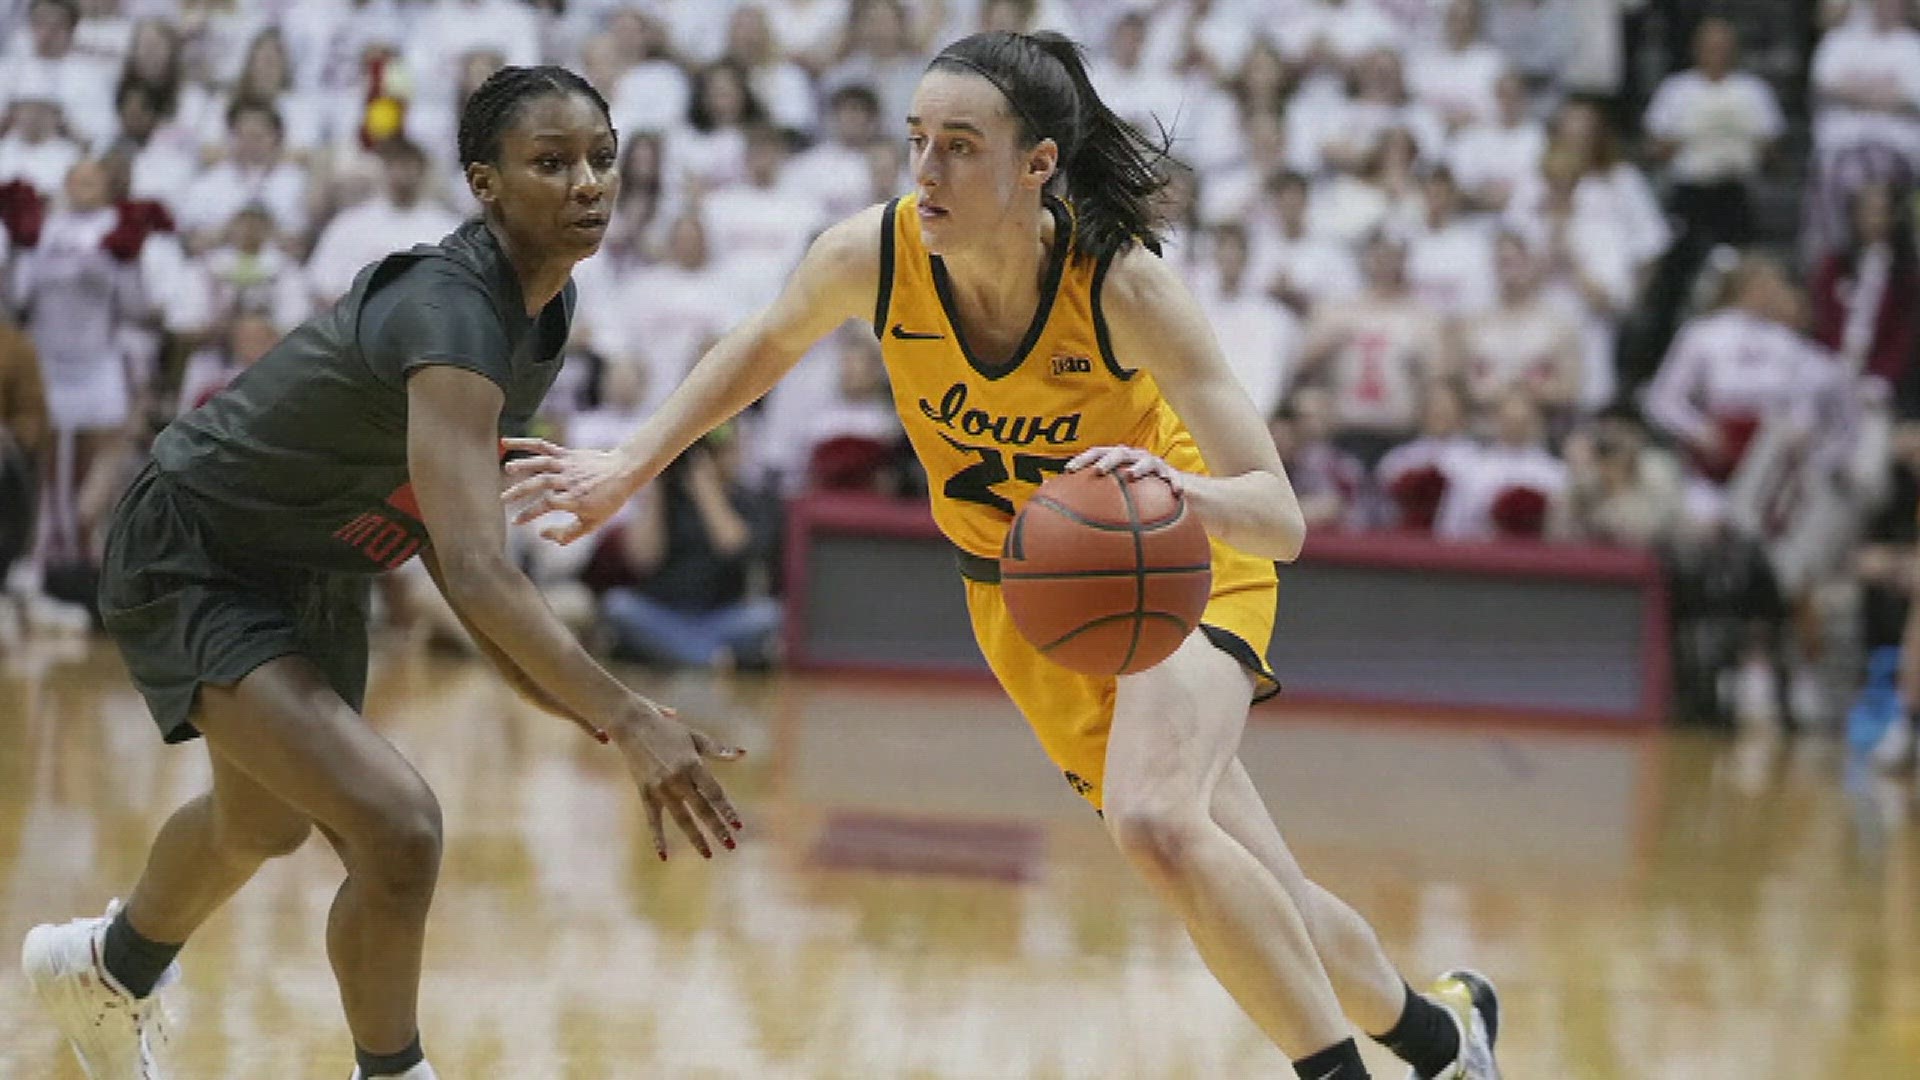 The Iowa star is in New York for the WNBA draft on Monday night, when she is expected to be the top pick by the Indiana Fever.